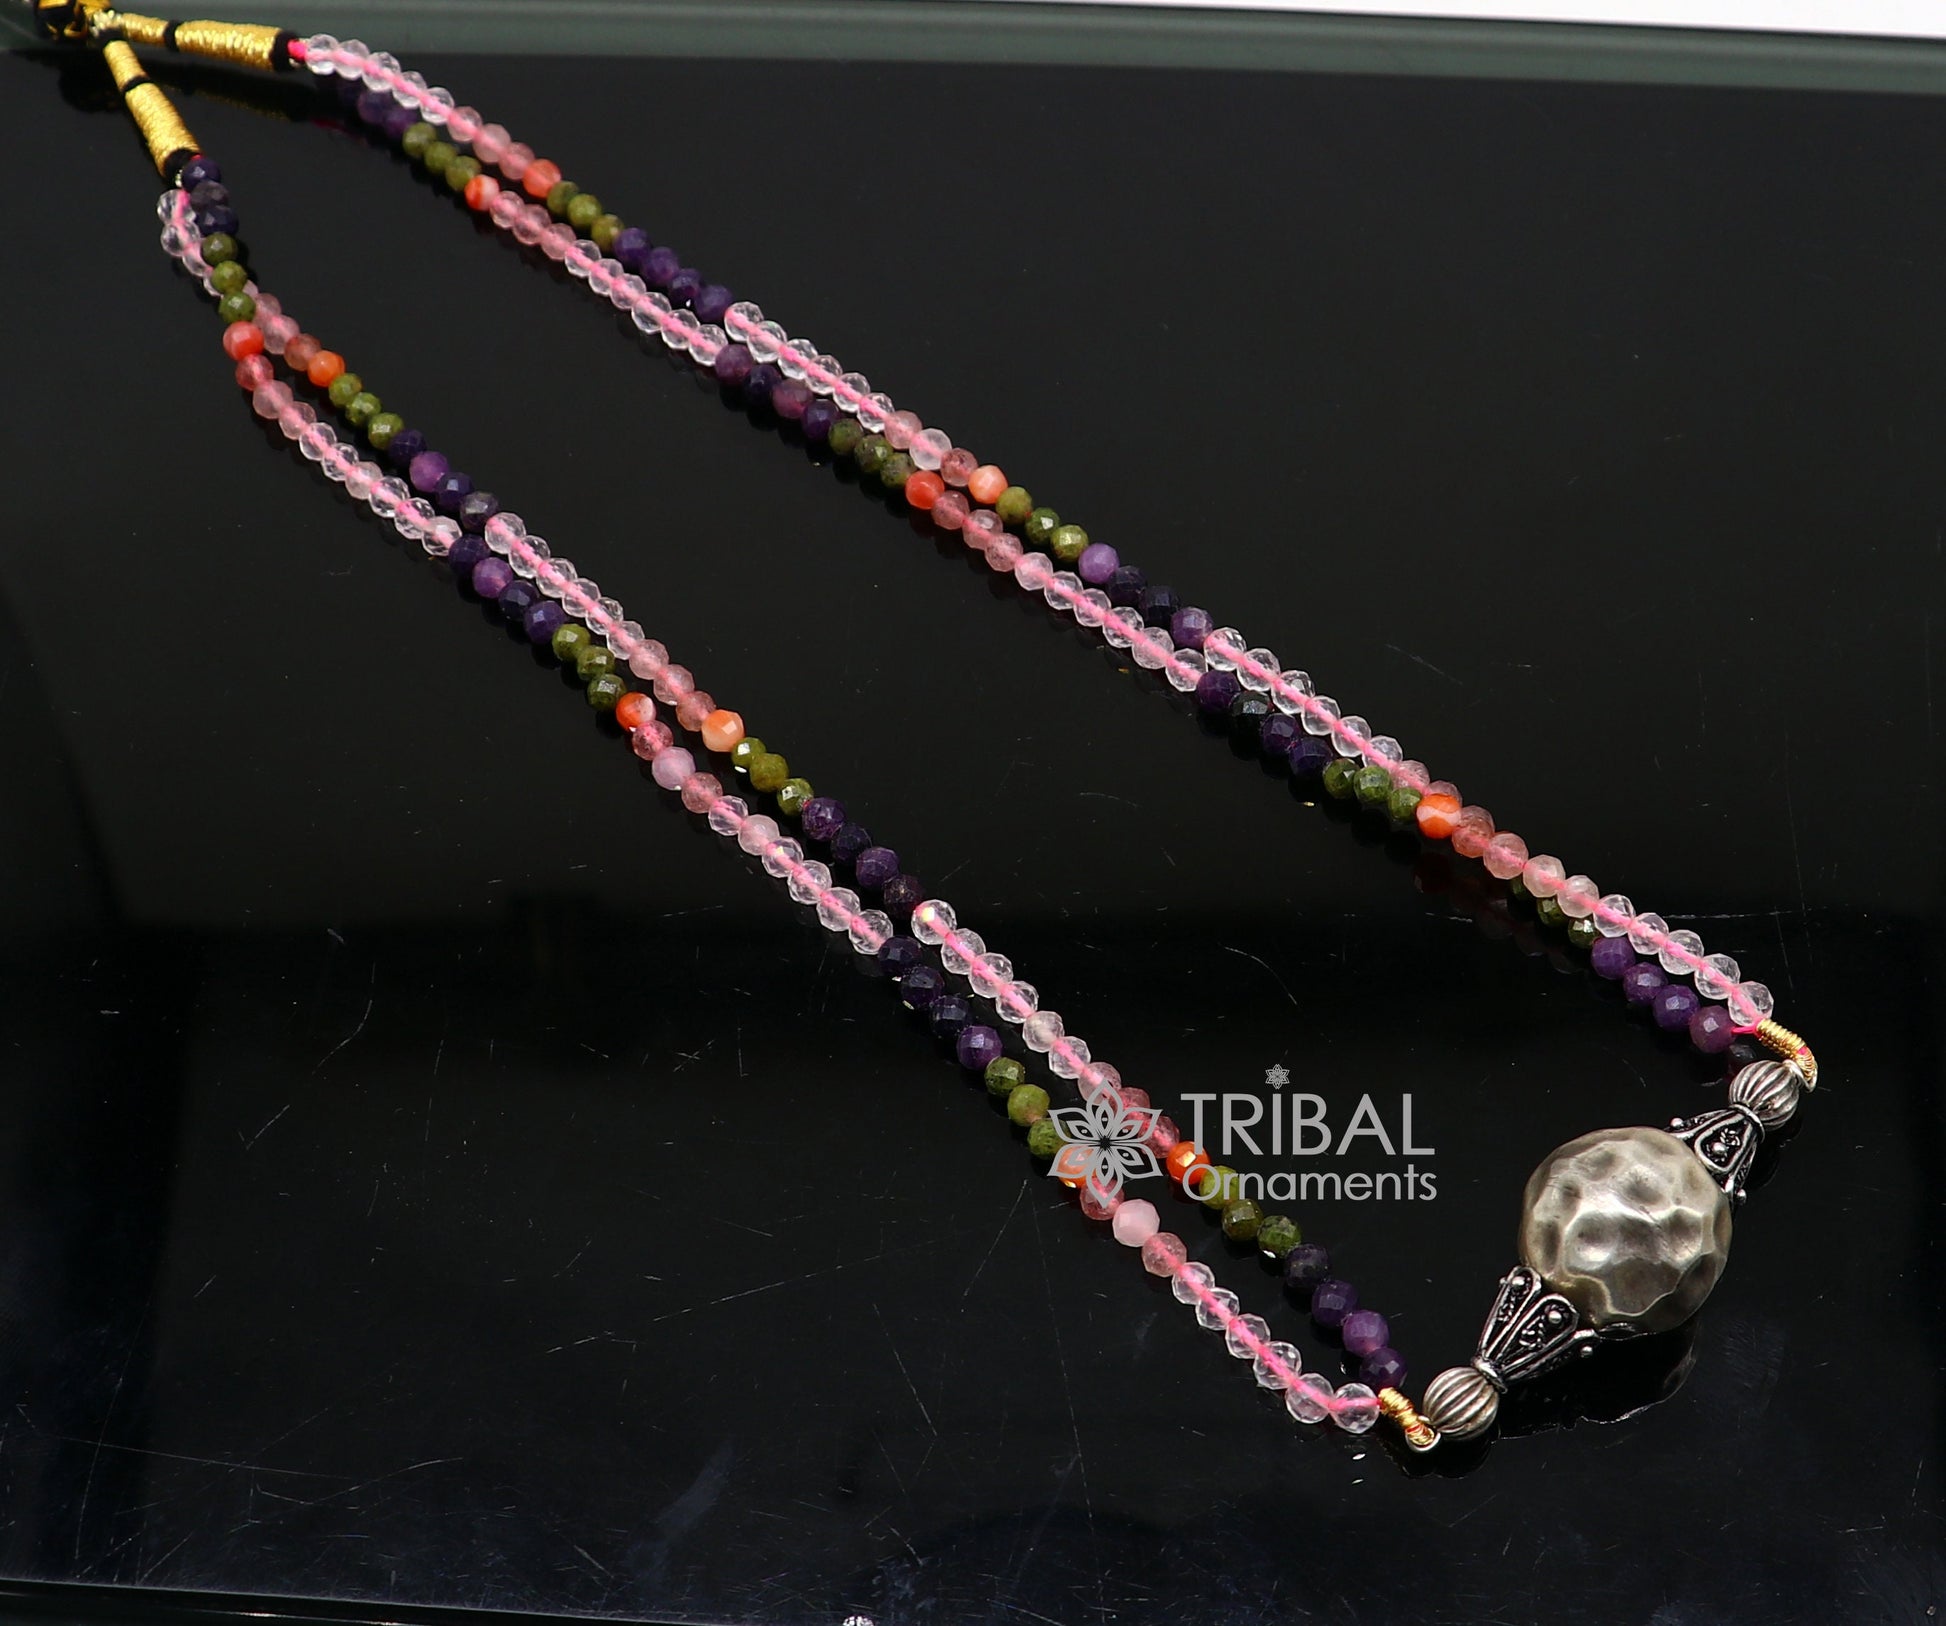 Trendy Indian traditional cultural multicolor stone beaded 925 sterling silver ball pendant necklace, choker tribal ethnic jewelry set613 - TRIBAL ORNAMENTS